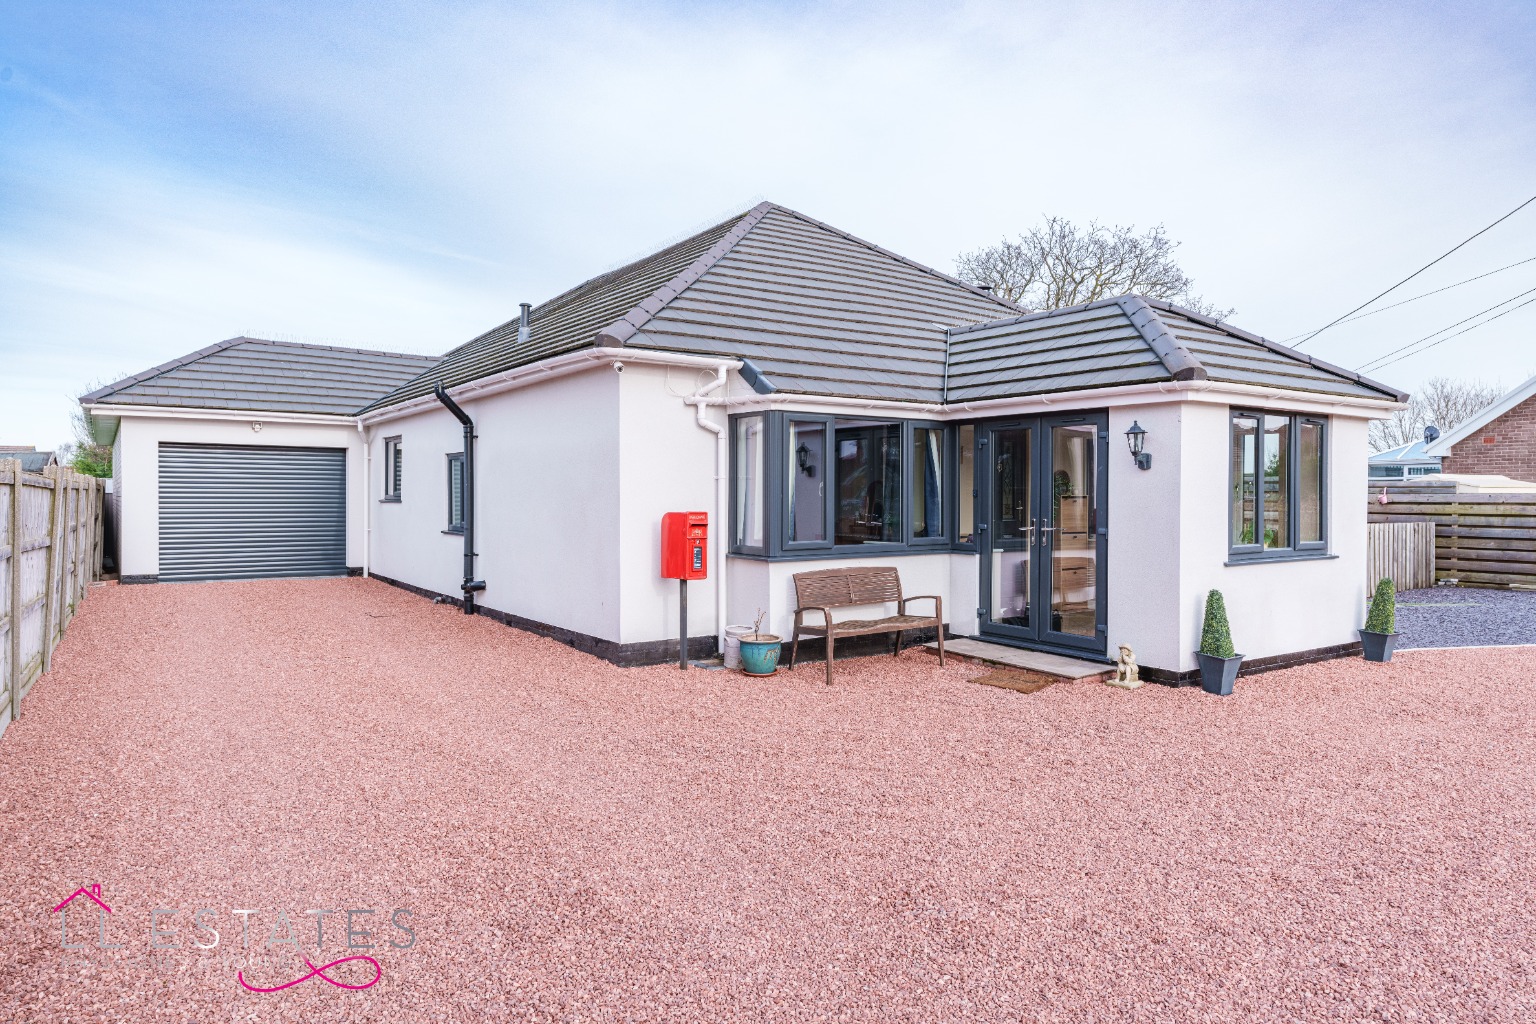 2 bed detached bungalow for sale, Abergele - Property Image 1